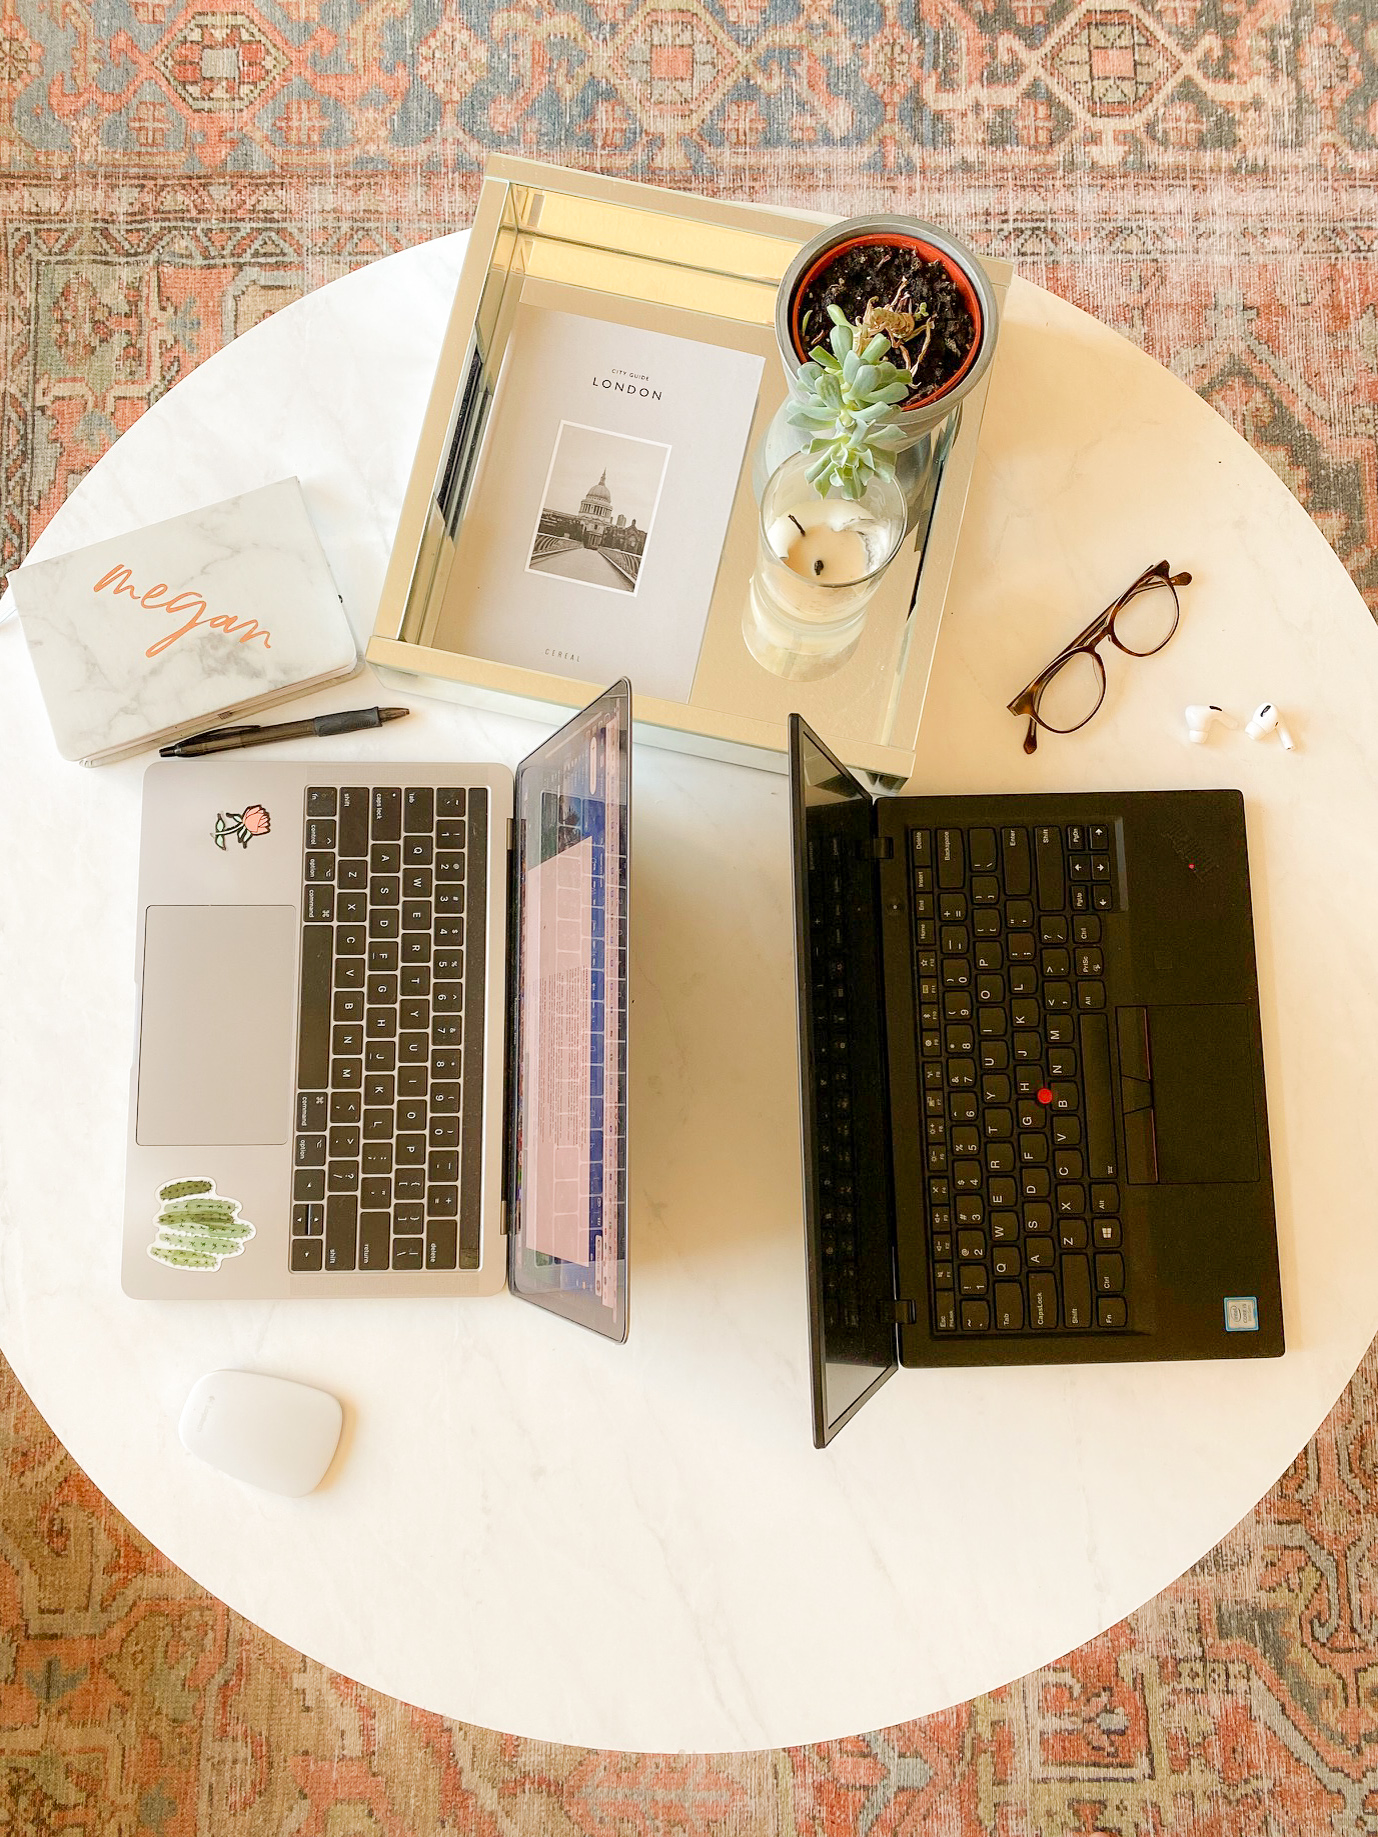 5 things to know if you and your partner are both working from home